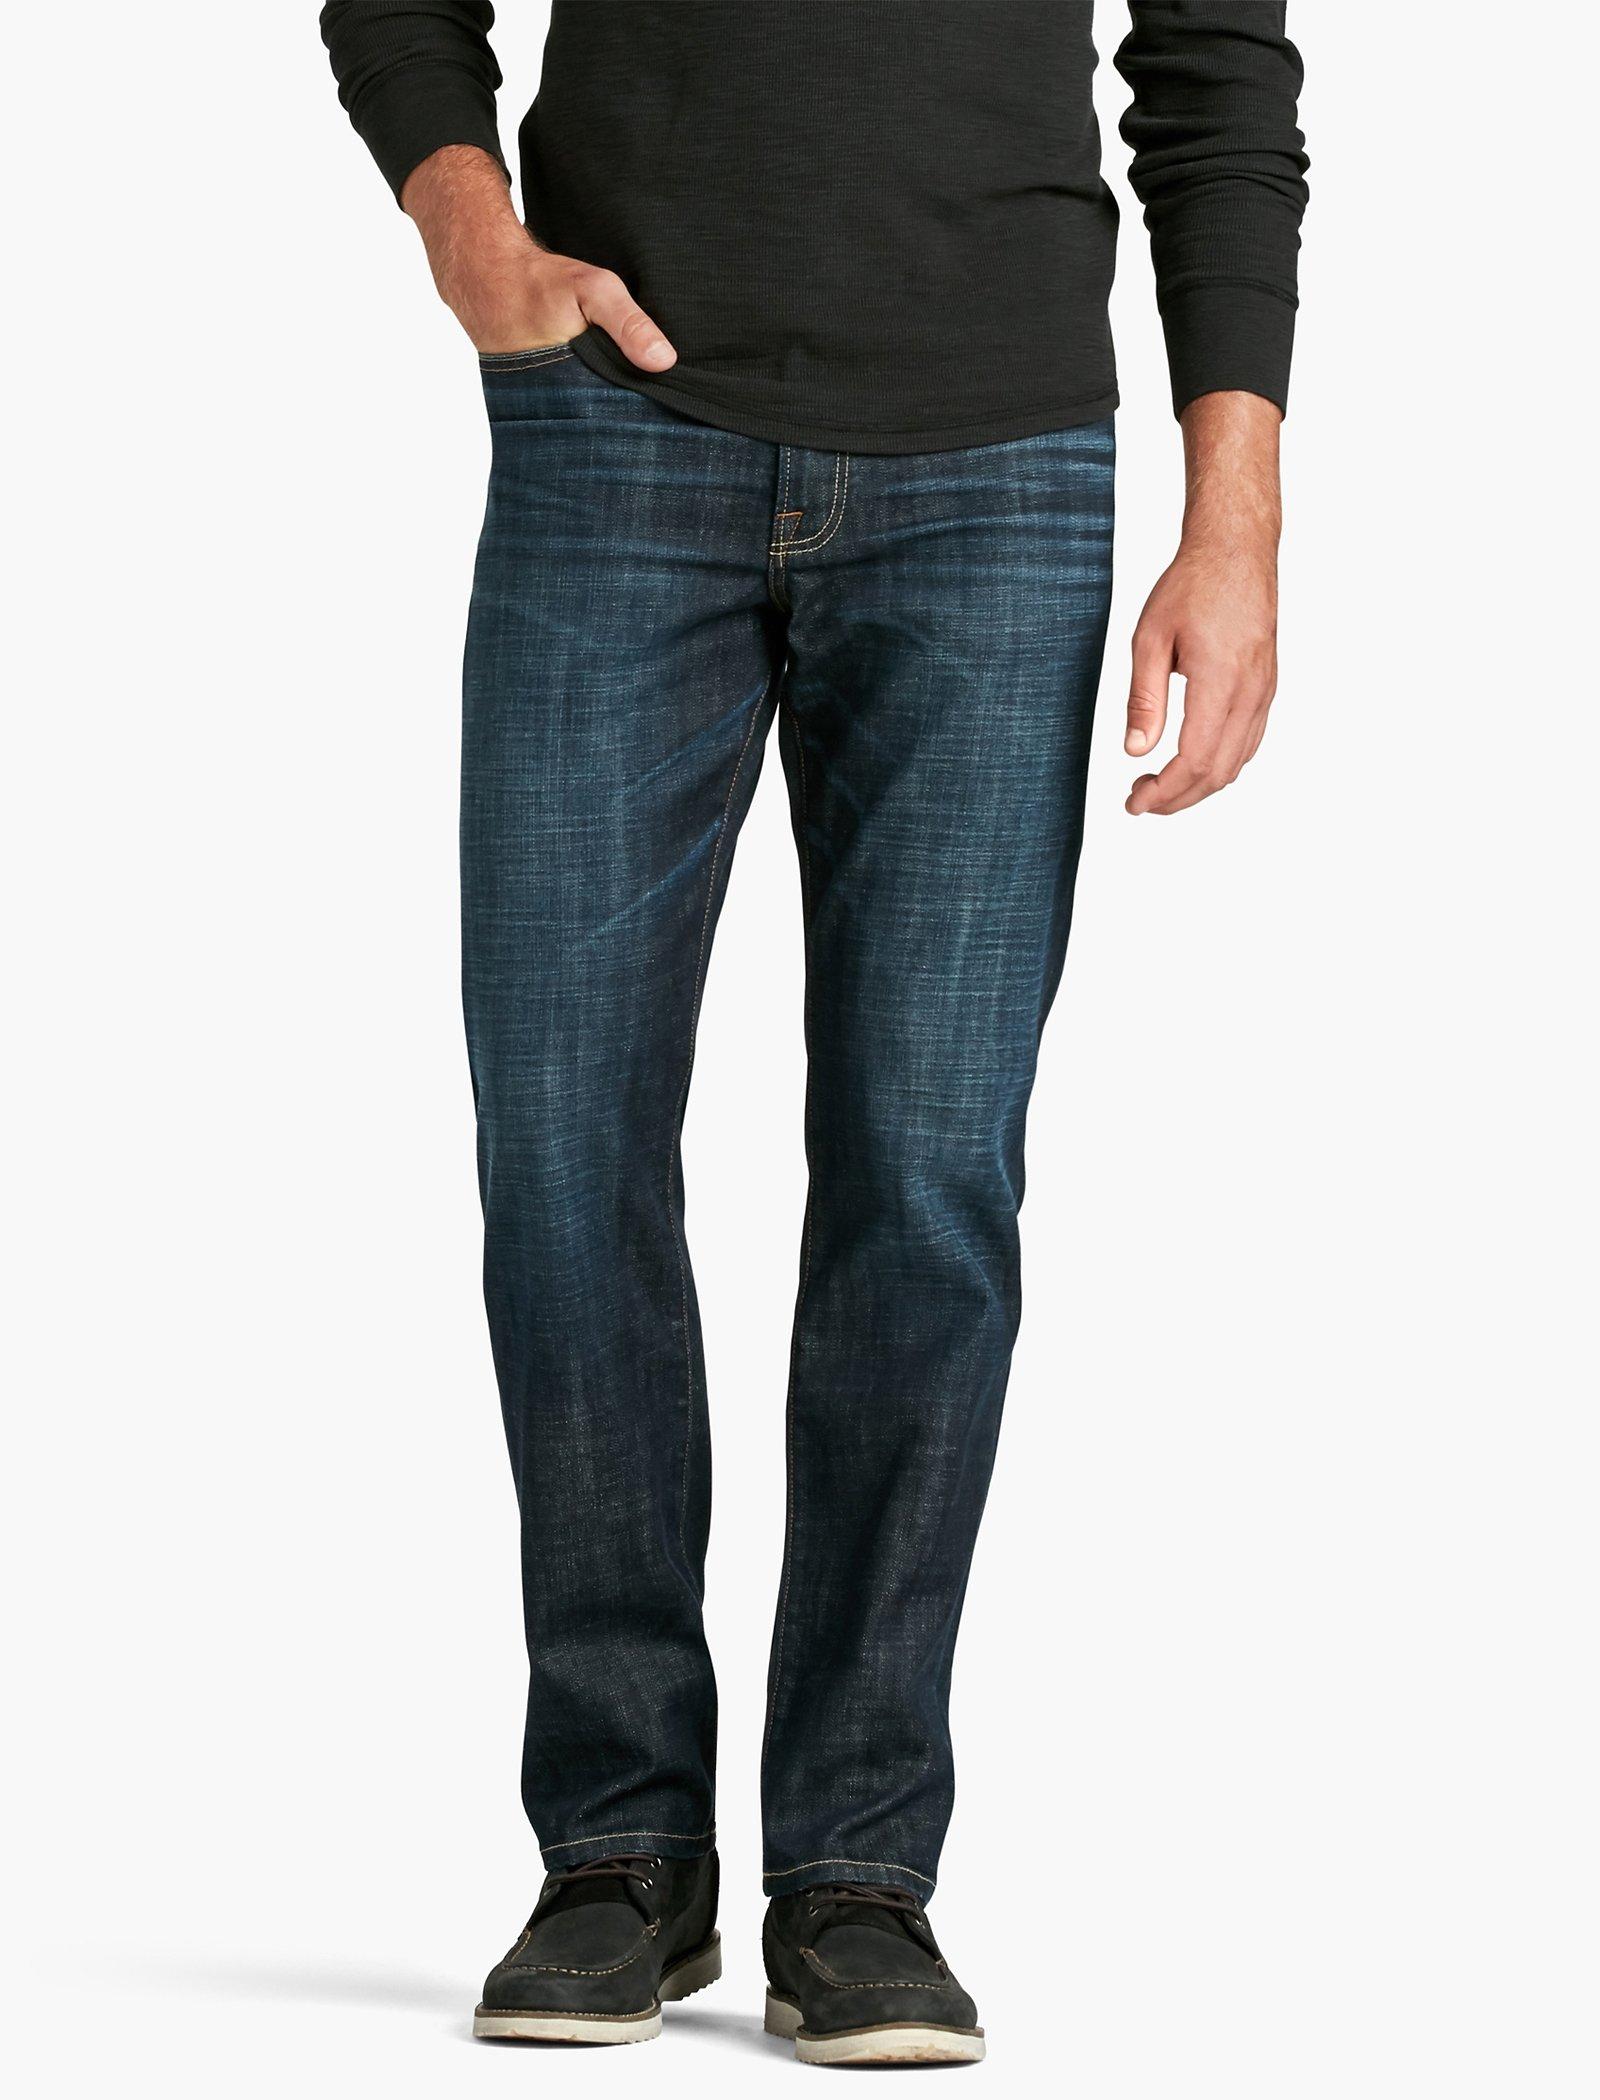 lucky jeans 329 classic straight